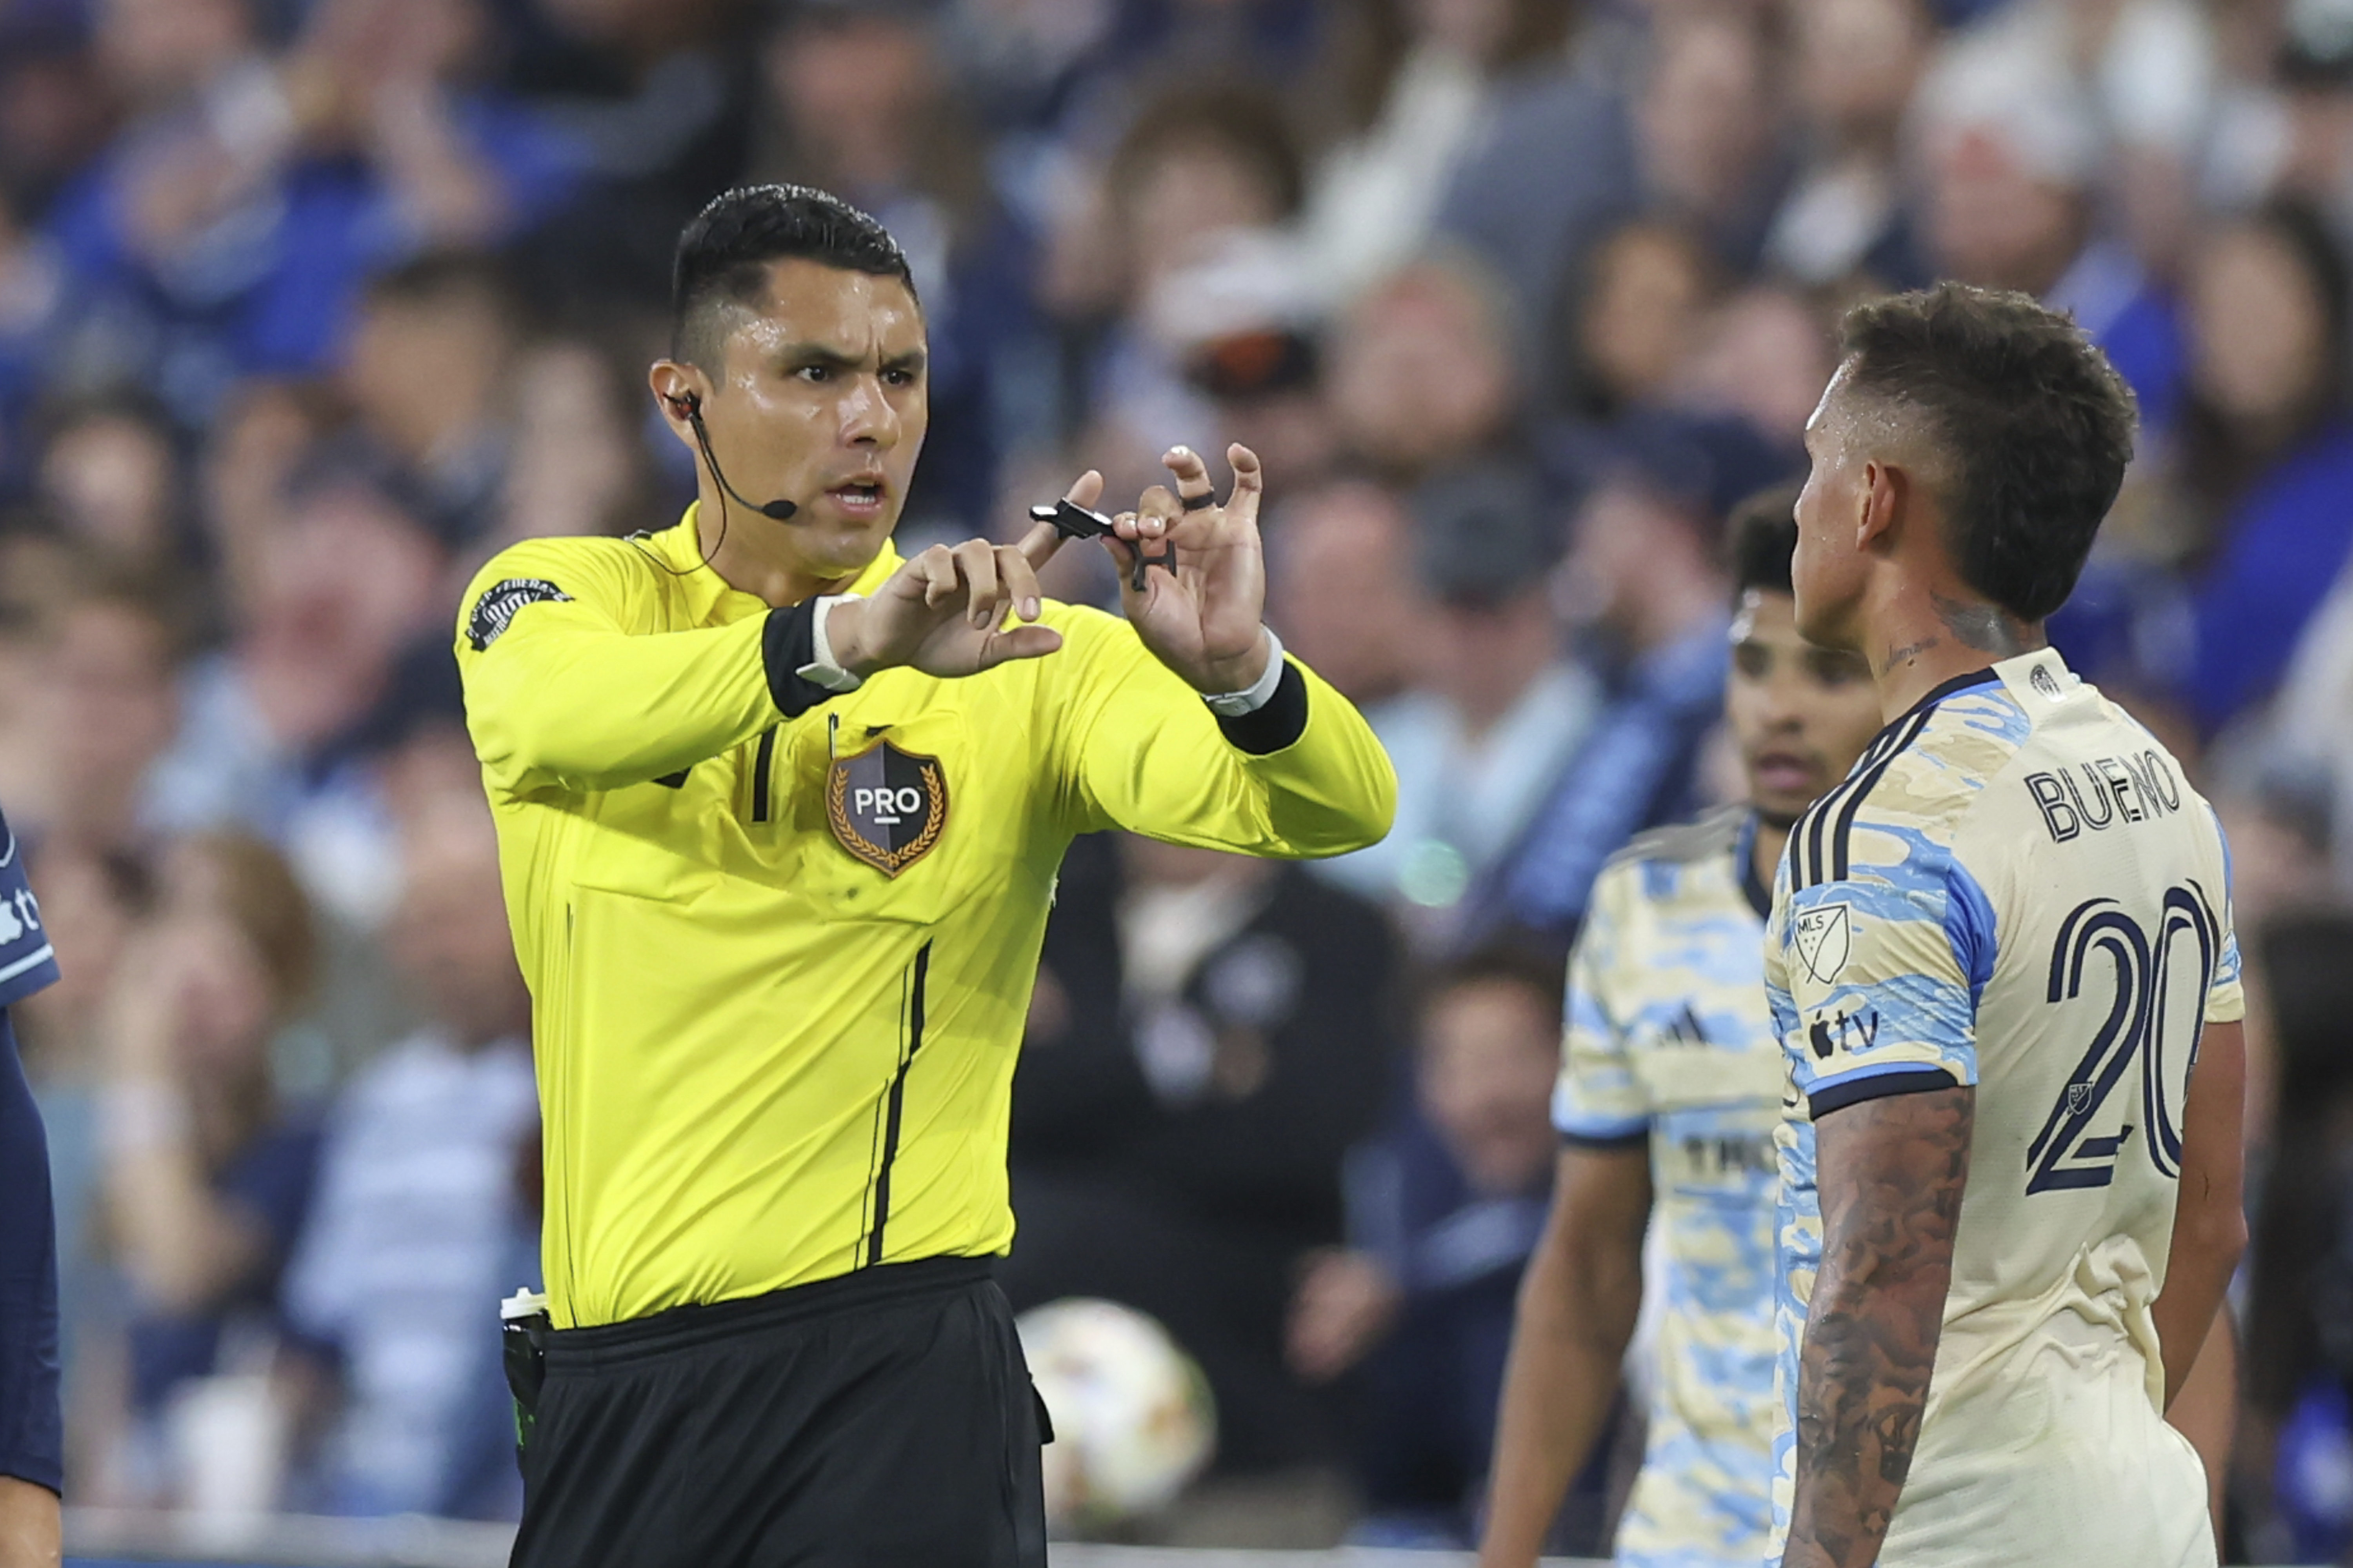 MLS referees' blown call in Sporting Kansas City vs. Union shows lockout  impact